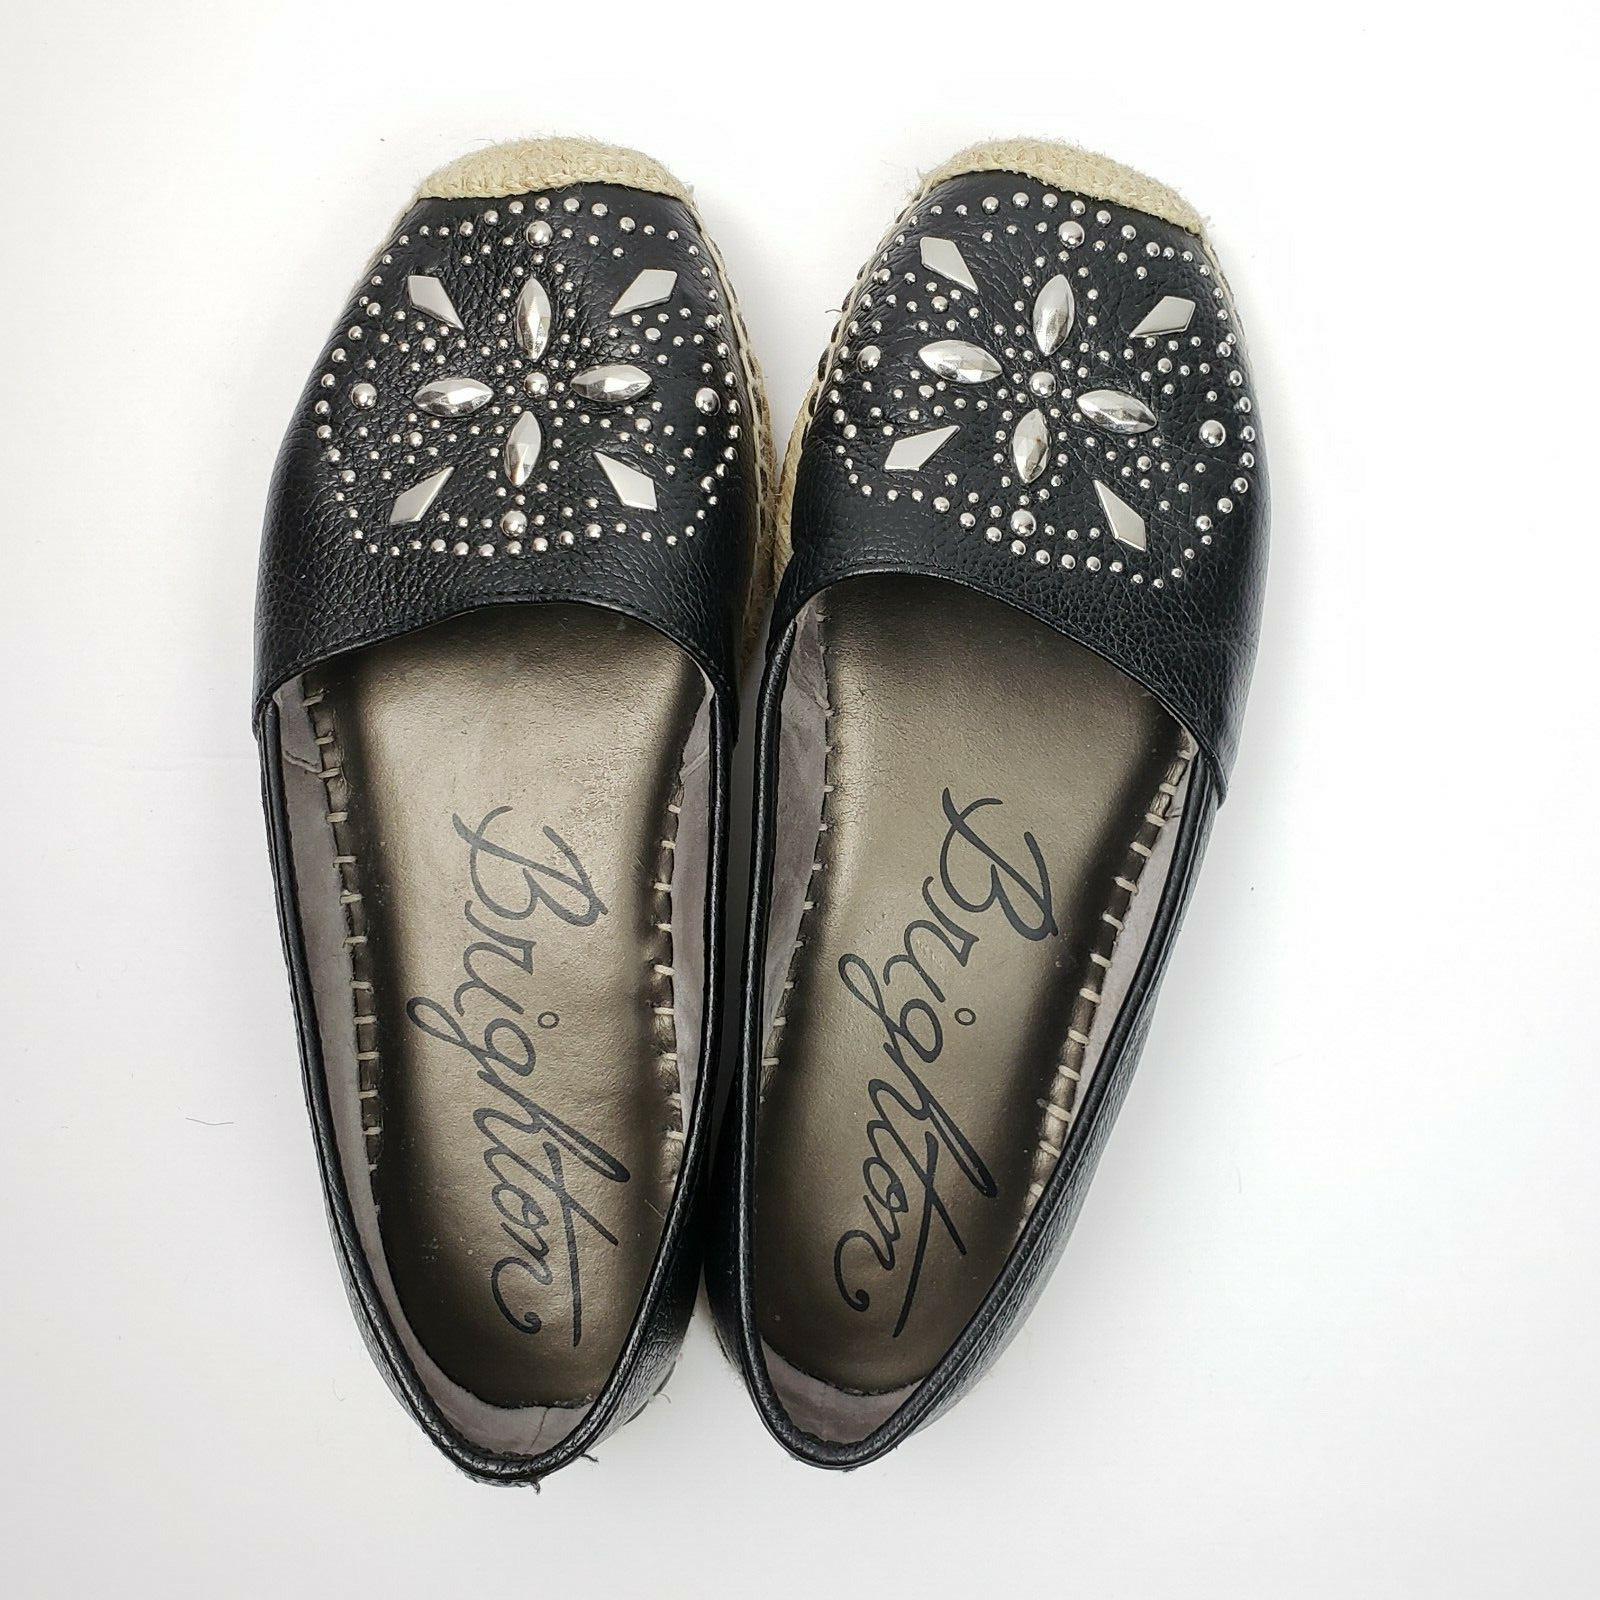 Primary image for Brighton Jett Espadrilles Slip On Leather Shoes Black Flats Silver Studs 7